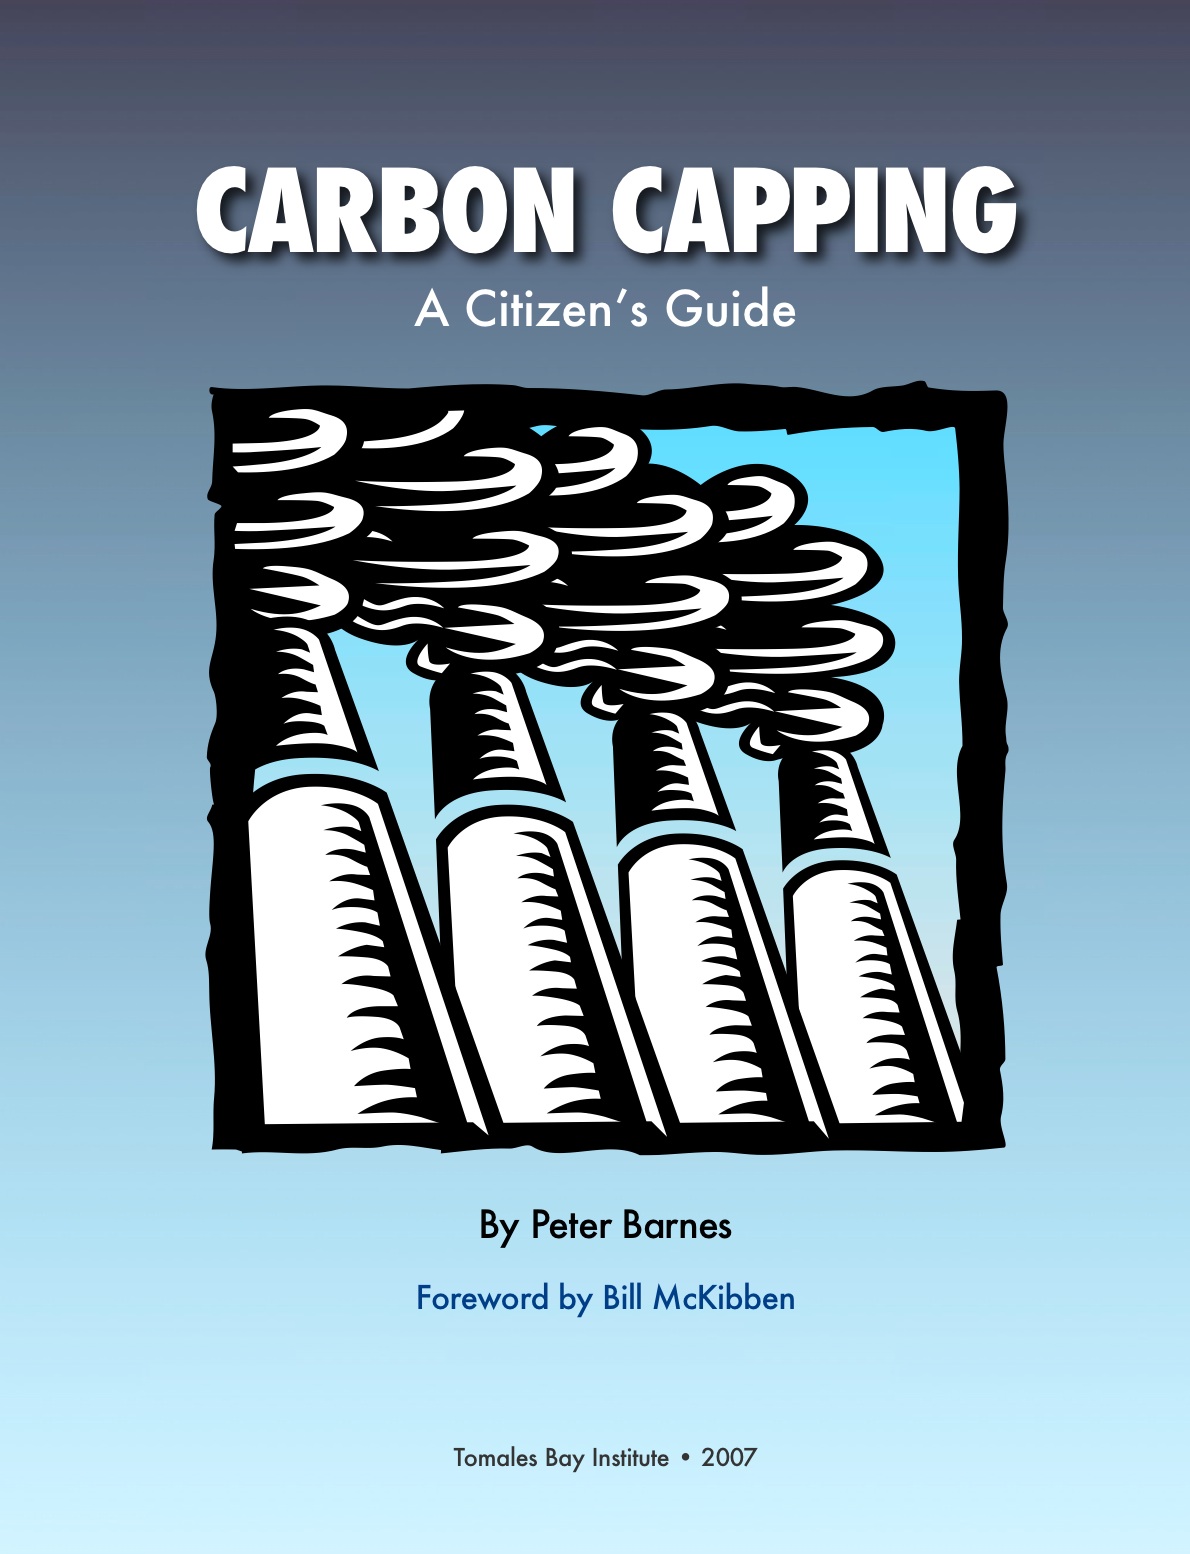 Carbon Capping: A Citizen's Guide